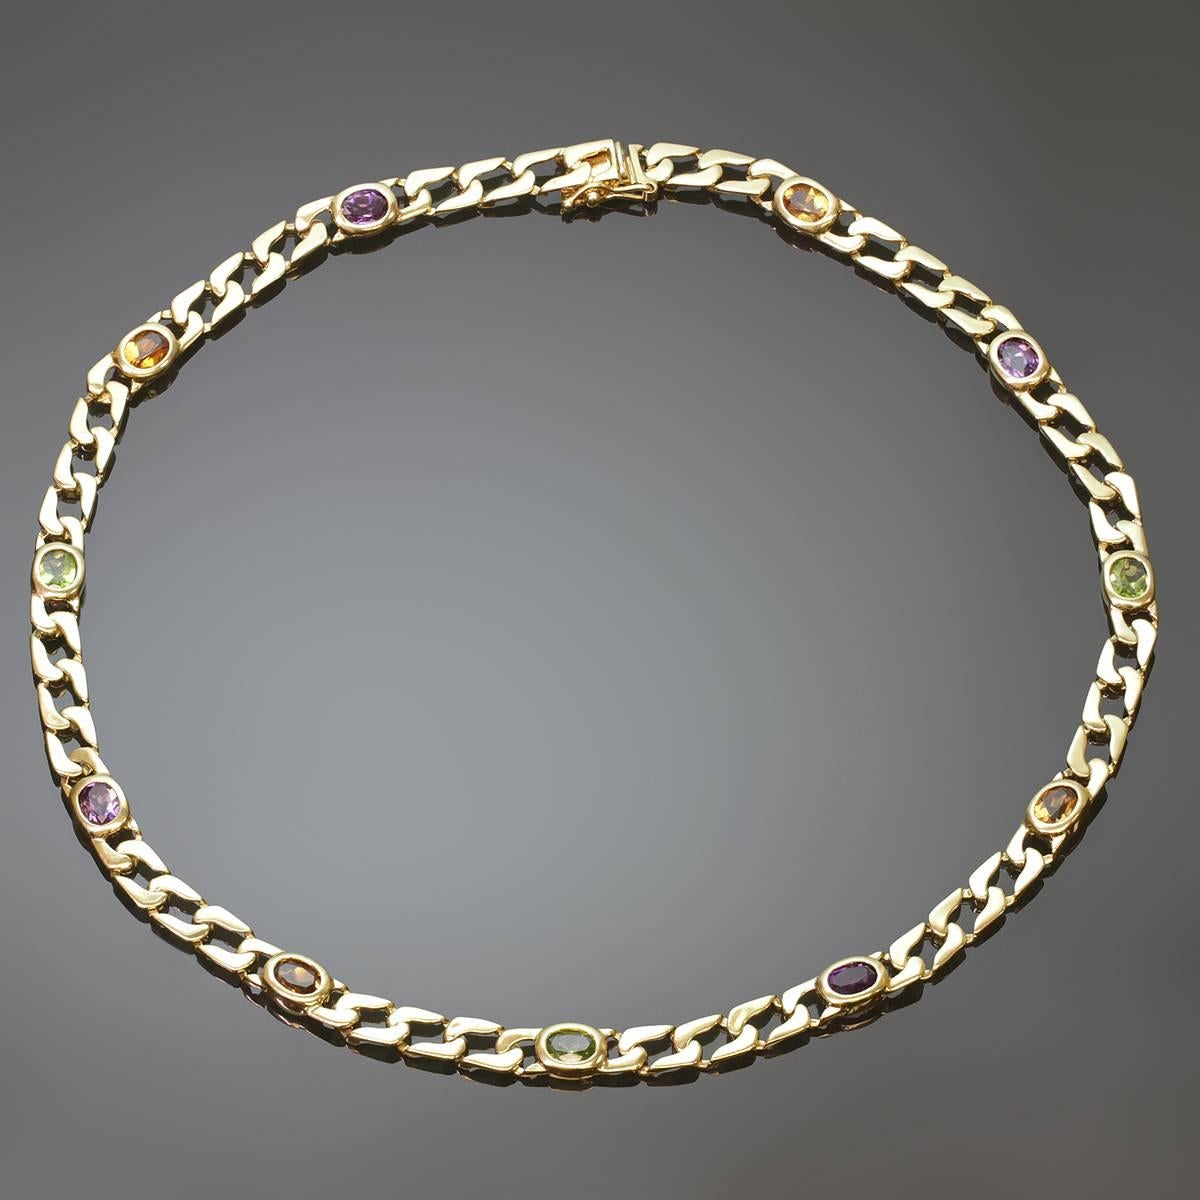 This classic vintage necklace features oval links bezel-set with faceted precious stones - green peridot, orange citrines, and purple amethyst - on a curb chain made of textured 14k yellow gold. A romantic and elegant design. Circa 1980s.